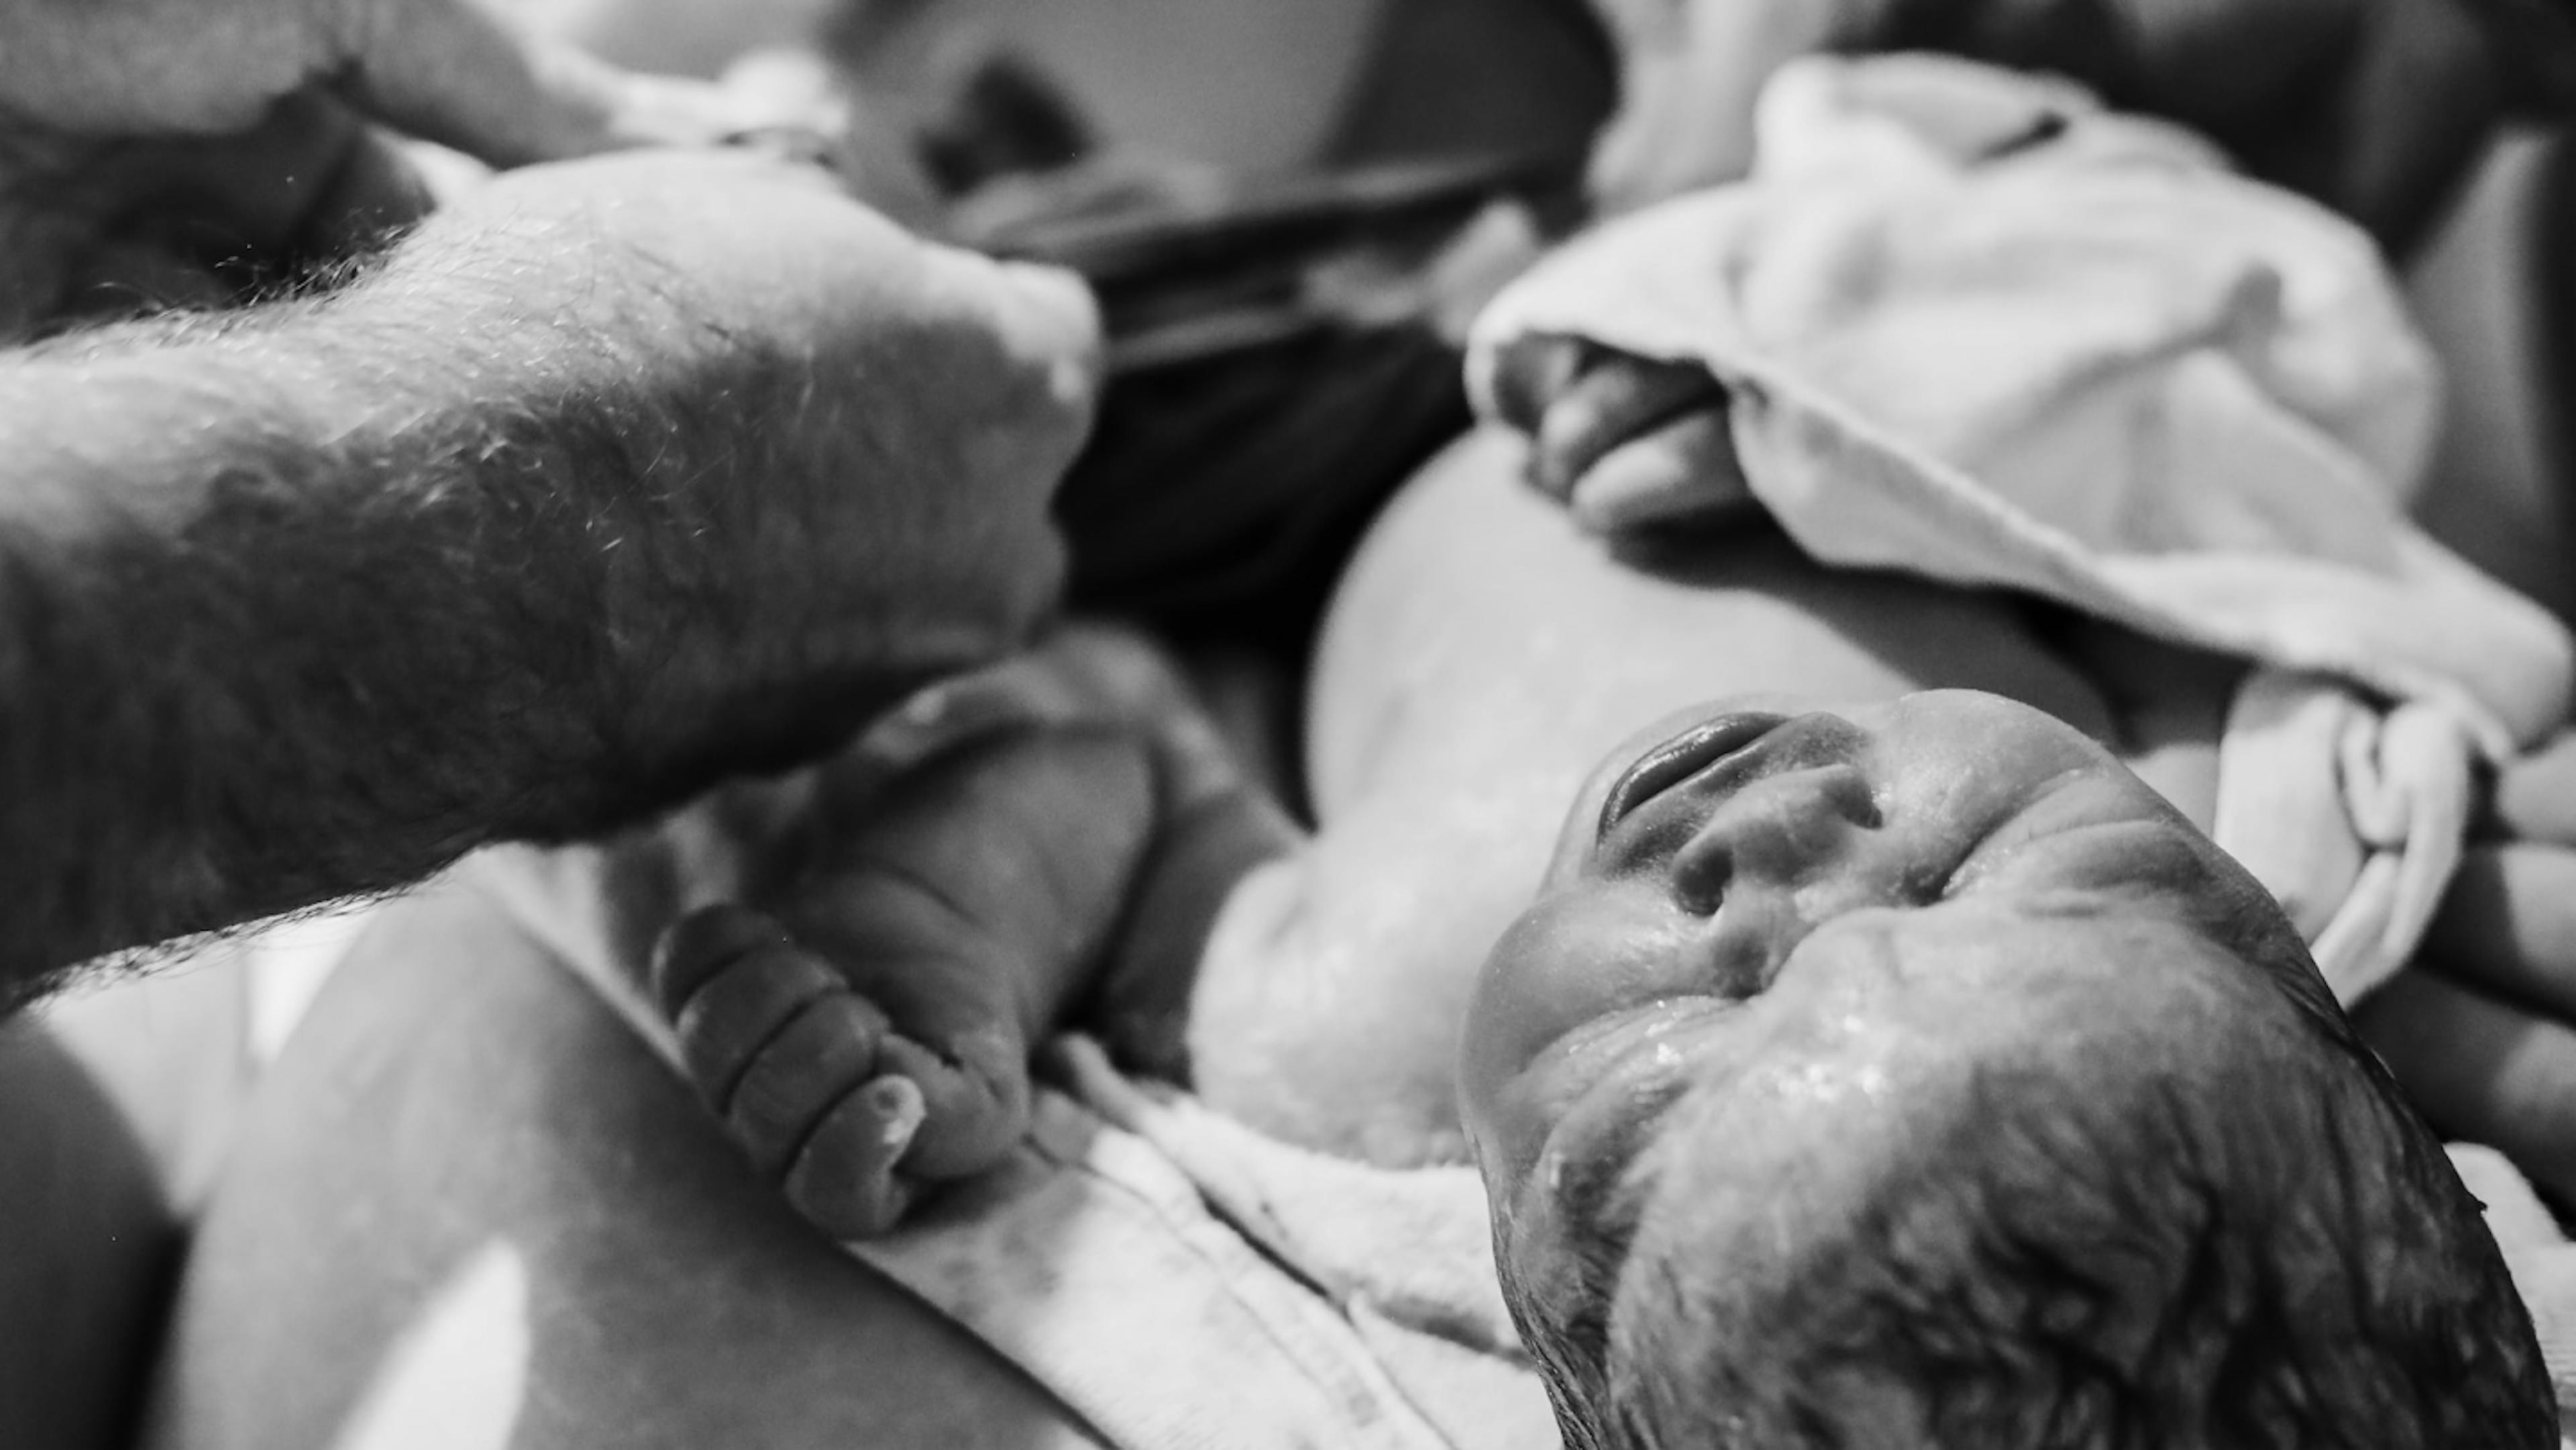 A baby is cleaned and the umbilical cord is cut during a home birth.